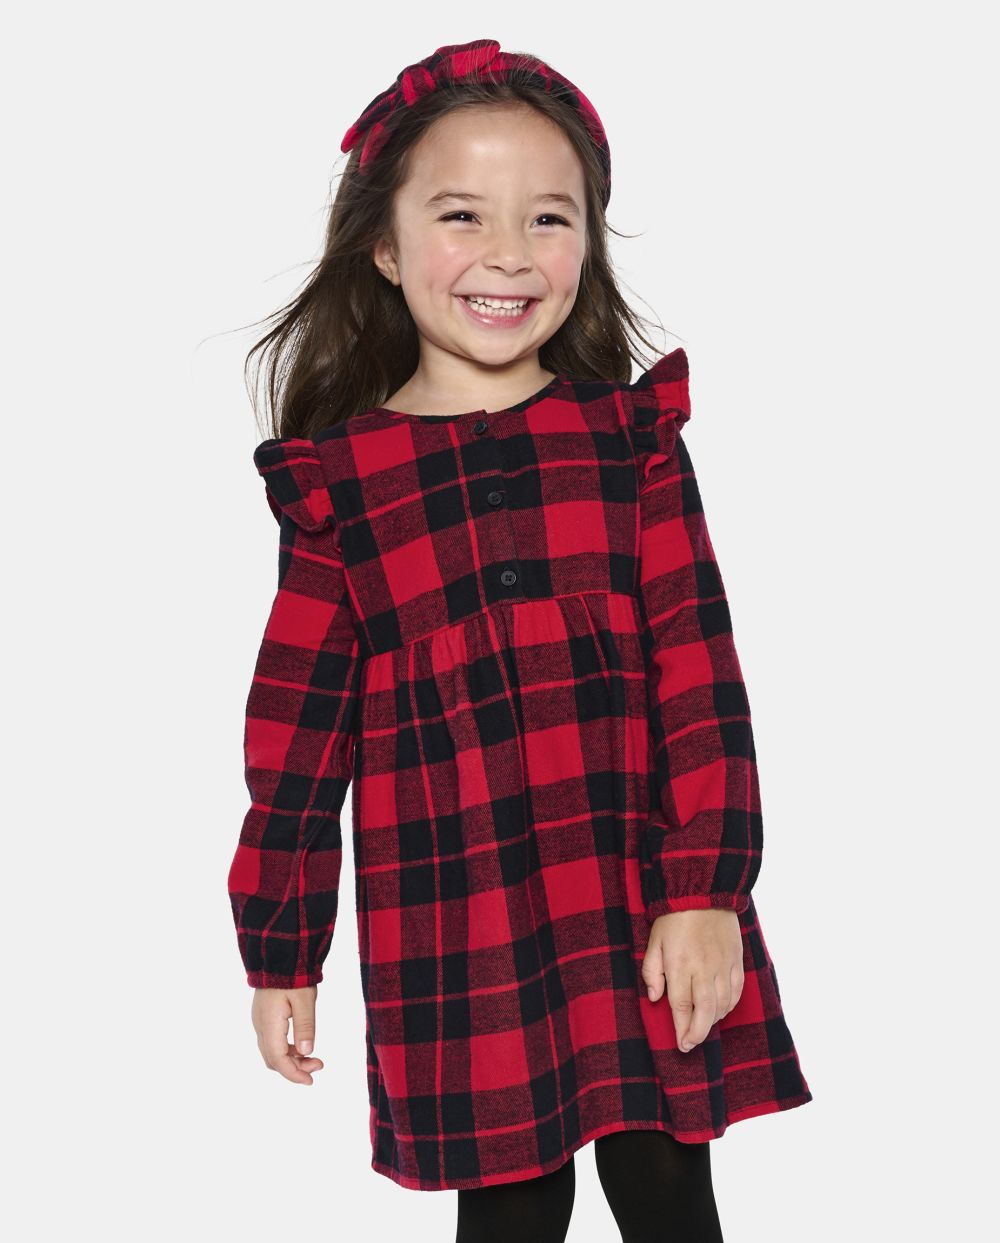 Toddler Baby Flutter Long Sleeves Crew Neck Plaid Print Above the Knee Button Front Shirt Dress